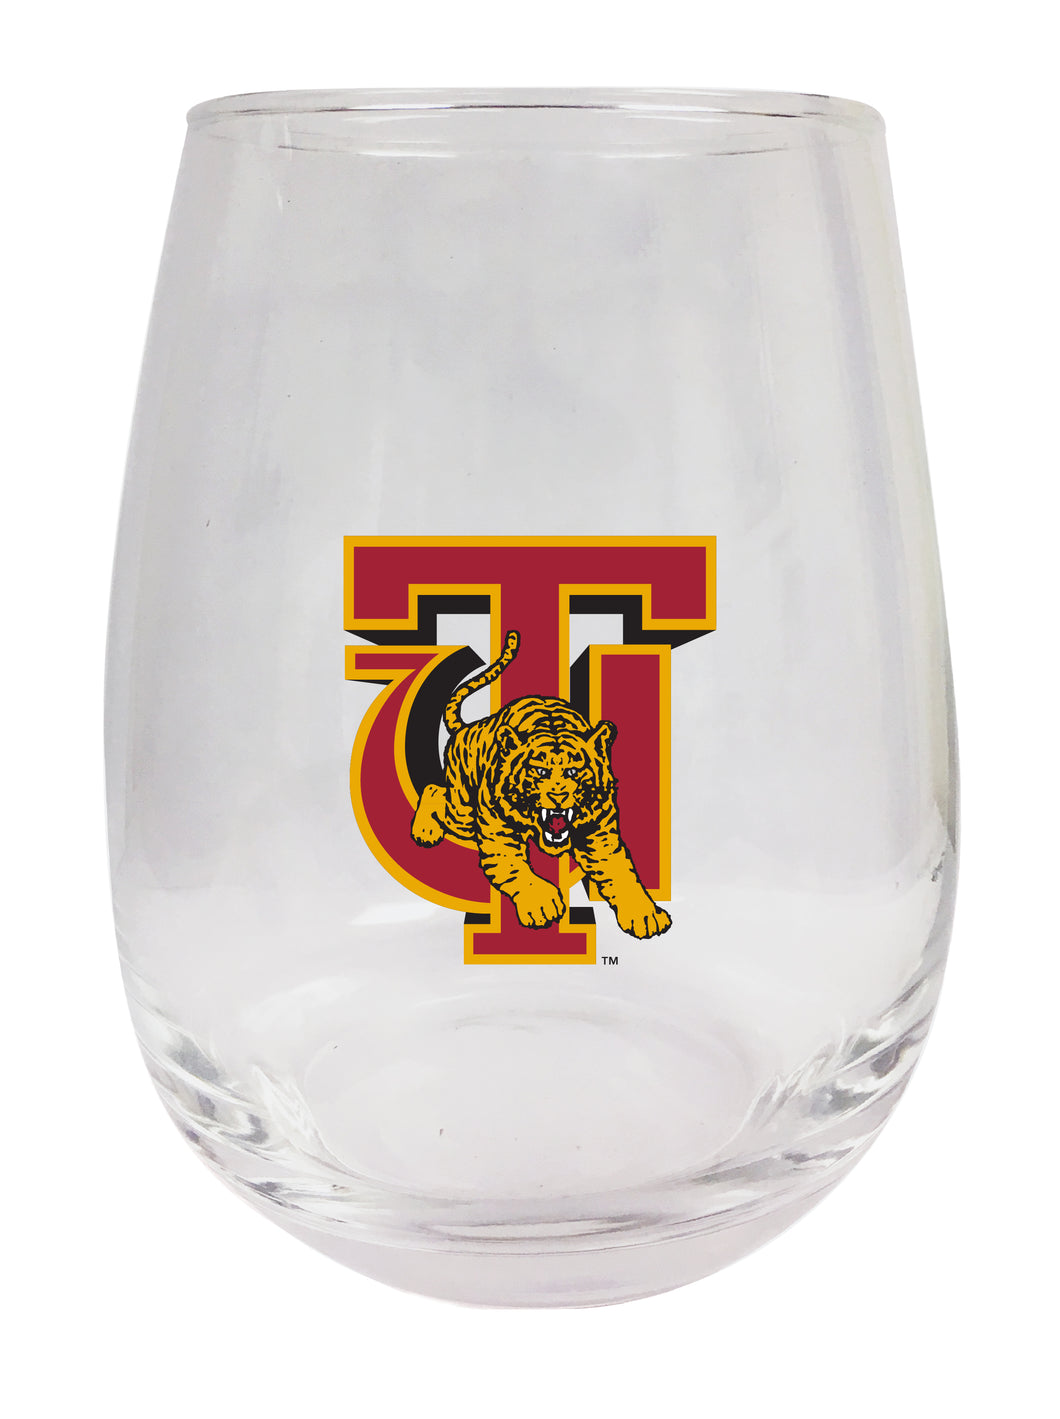 Tuskegee University Stemless Wine Glass - 9 oz. | Officially Licensed NCAA Merchandise